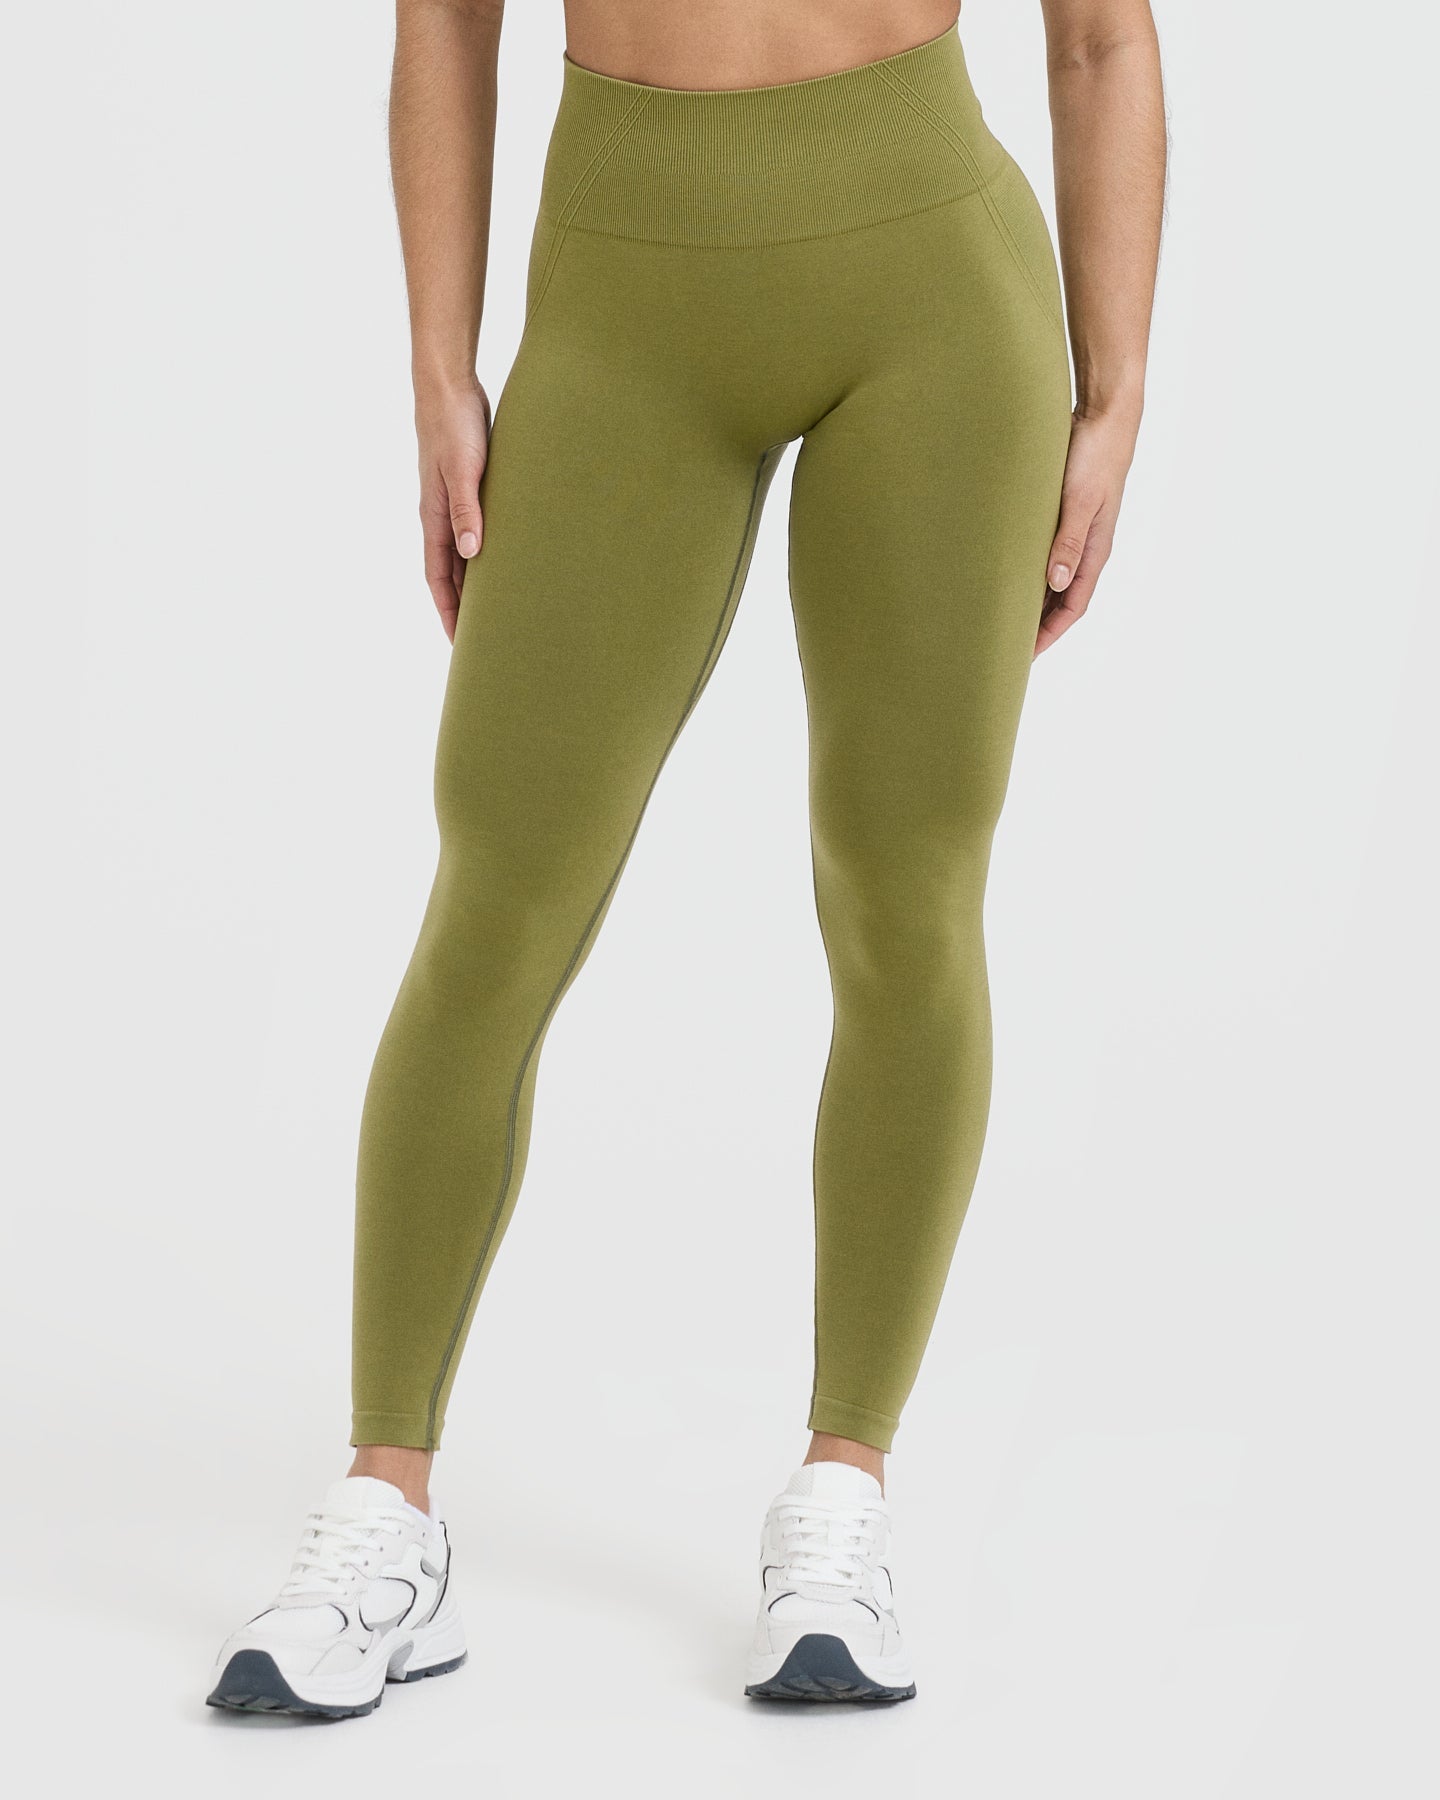 Online Exclusive, Lysse Signature Center Seam Ankle Length Leggings in  Olive Green